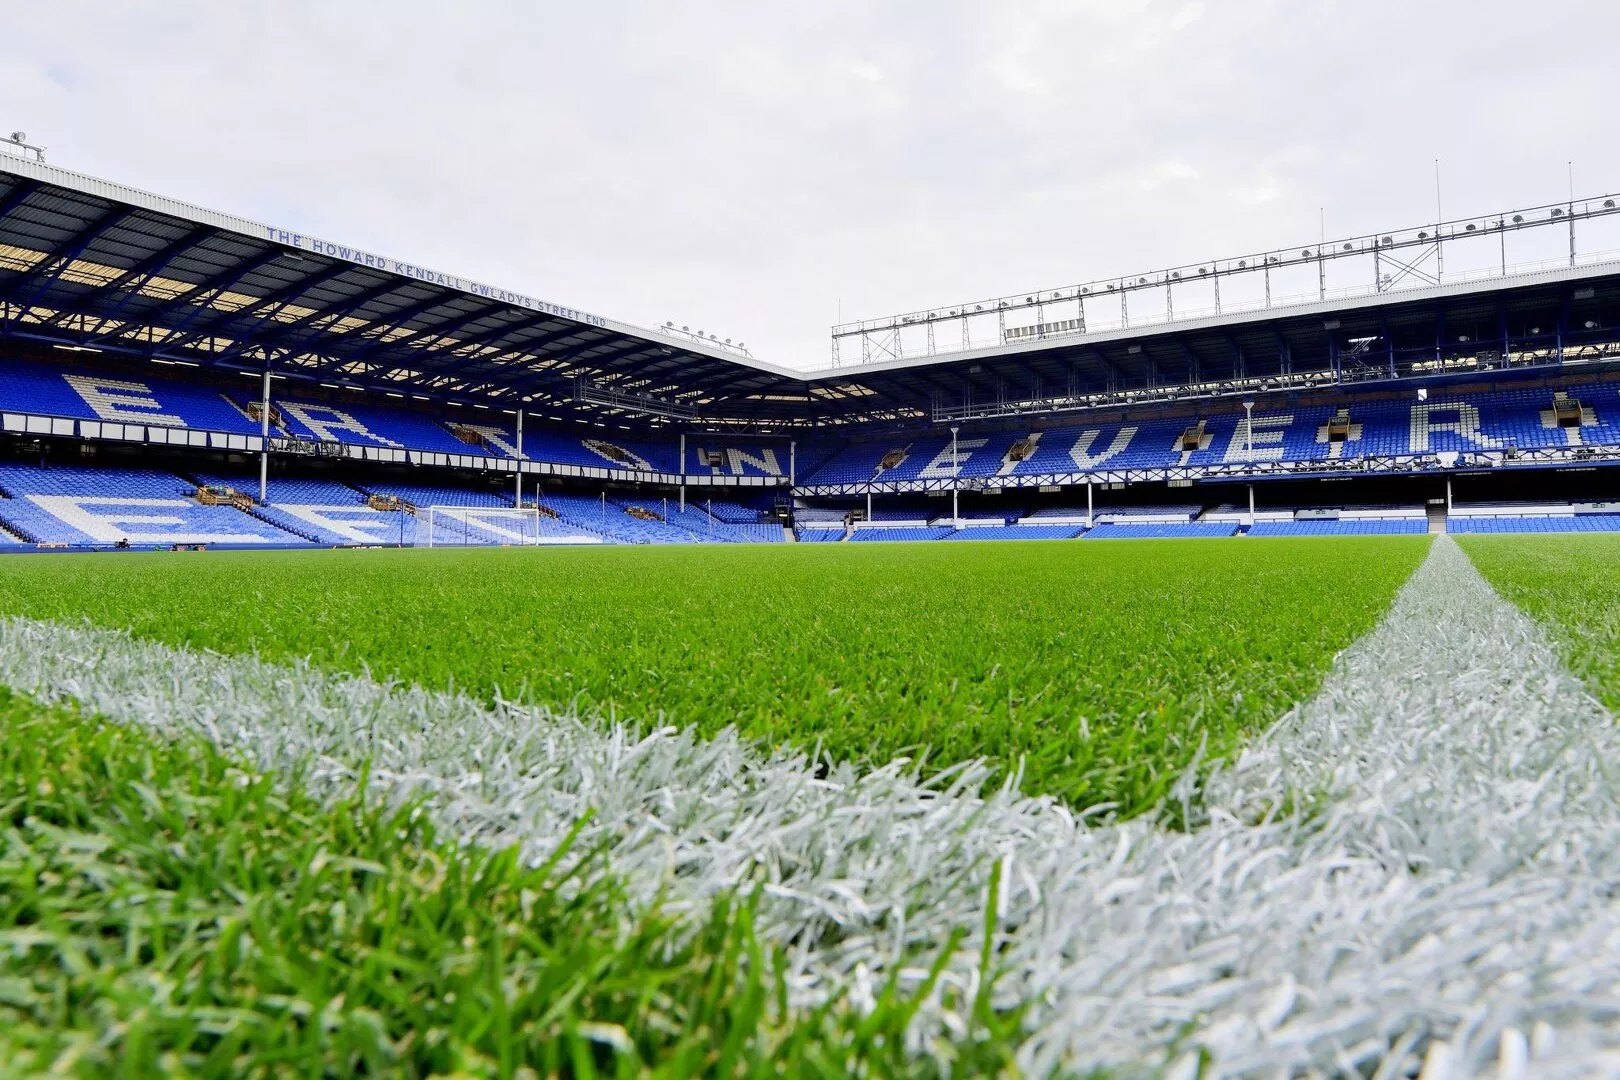 Everton could be compelled to sell key players if 777 Partners takeover gets blocked